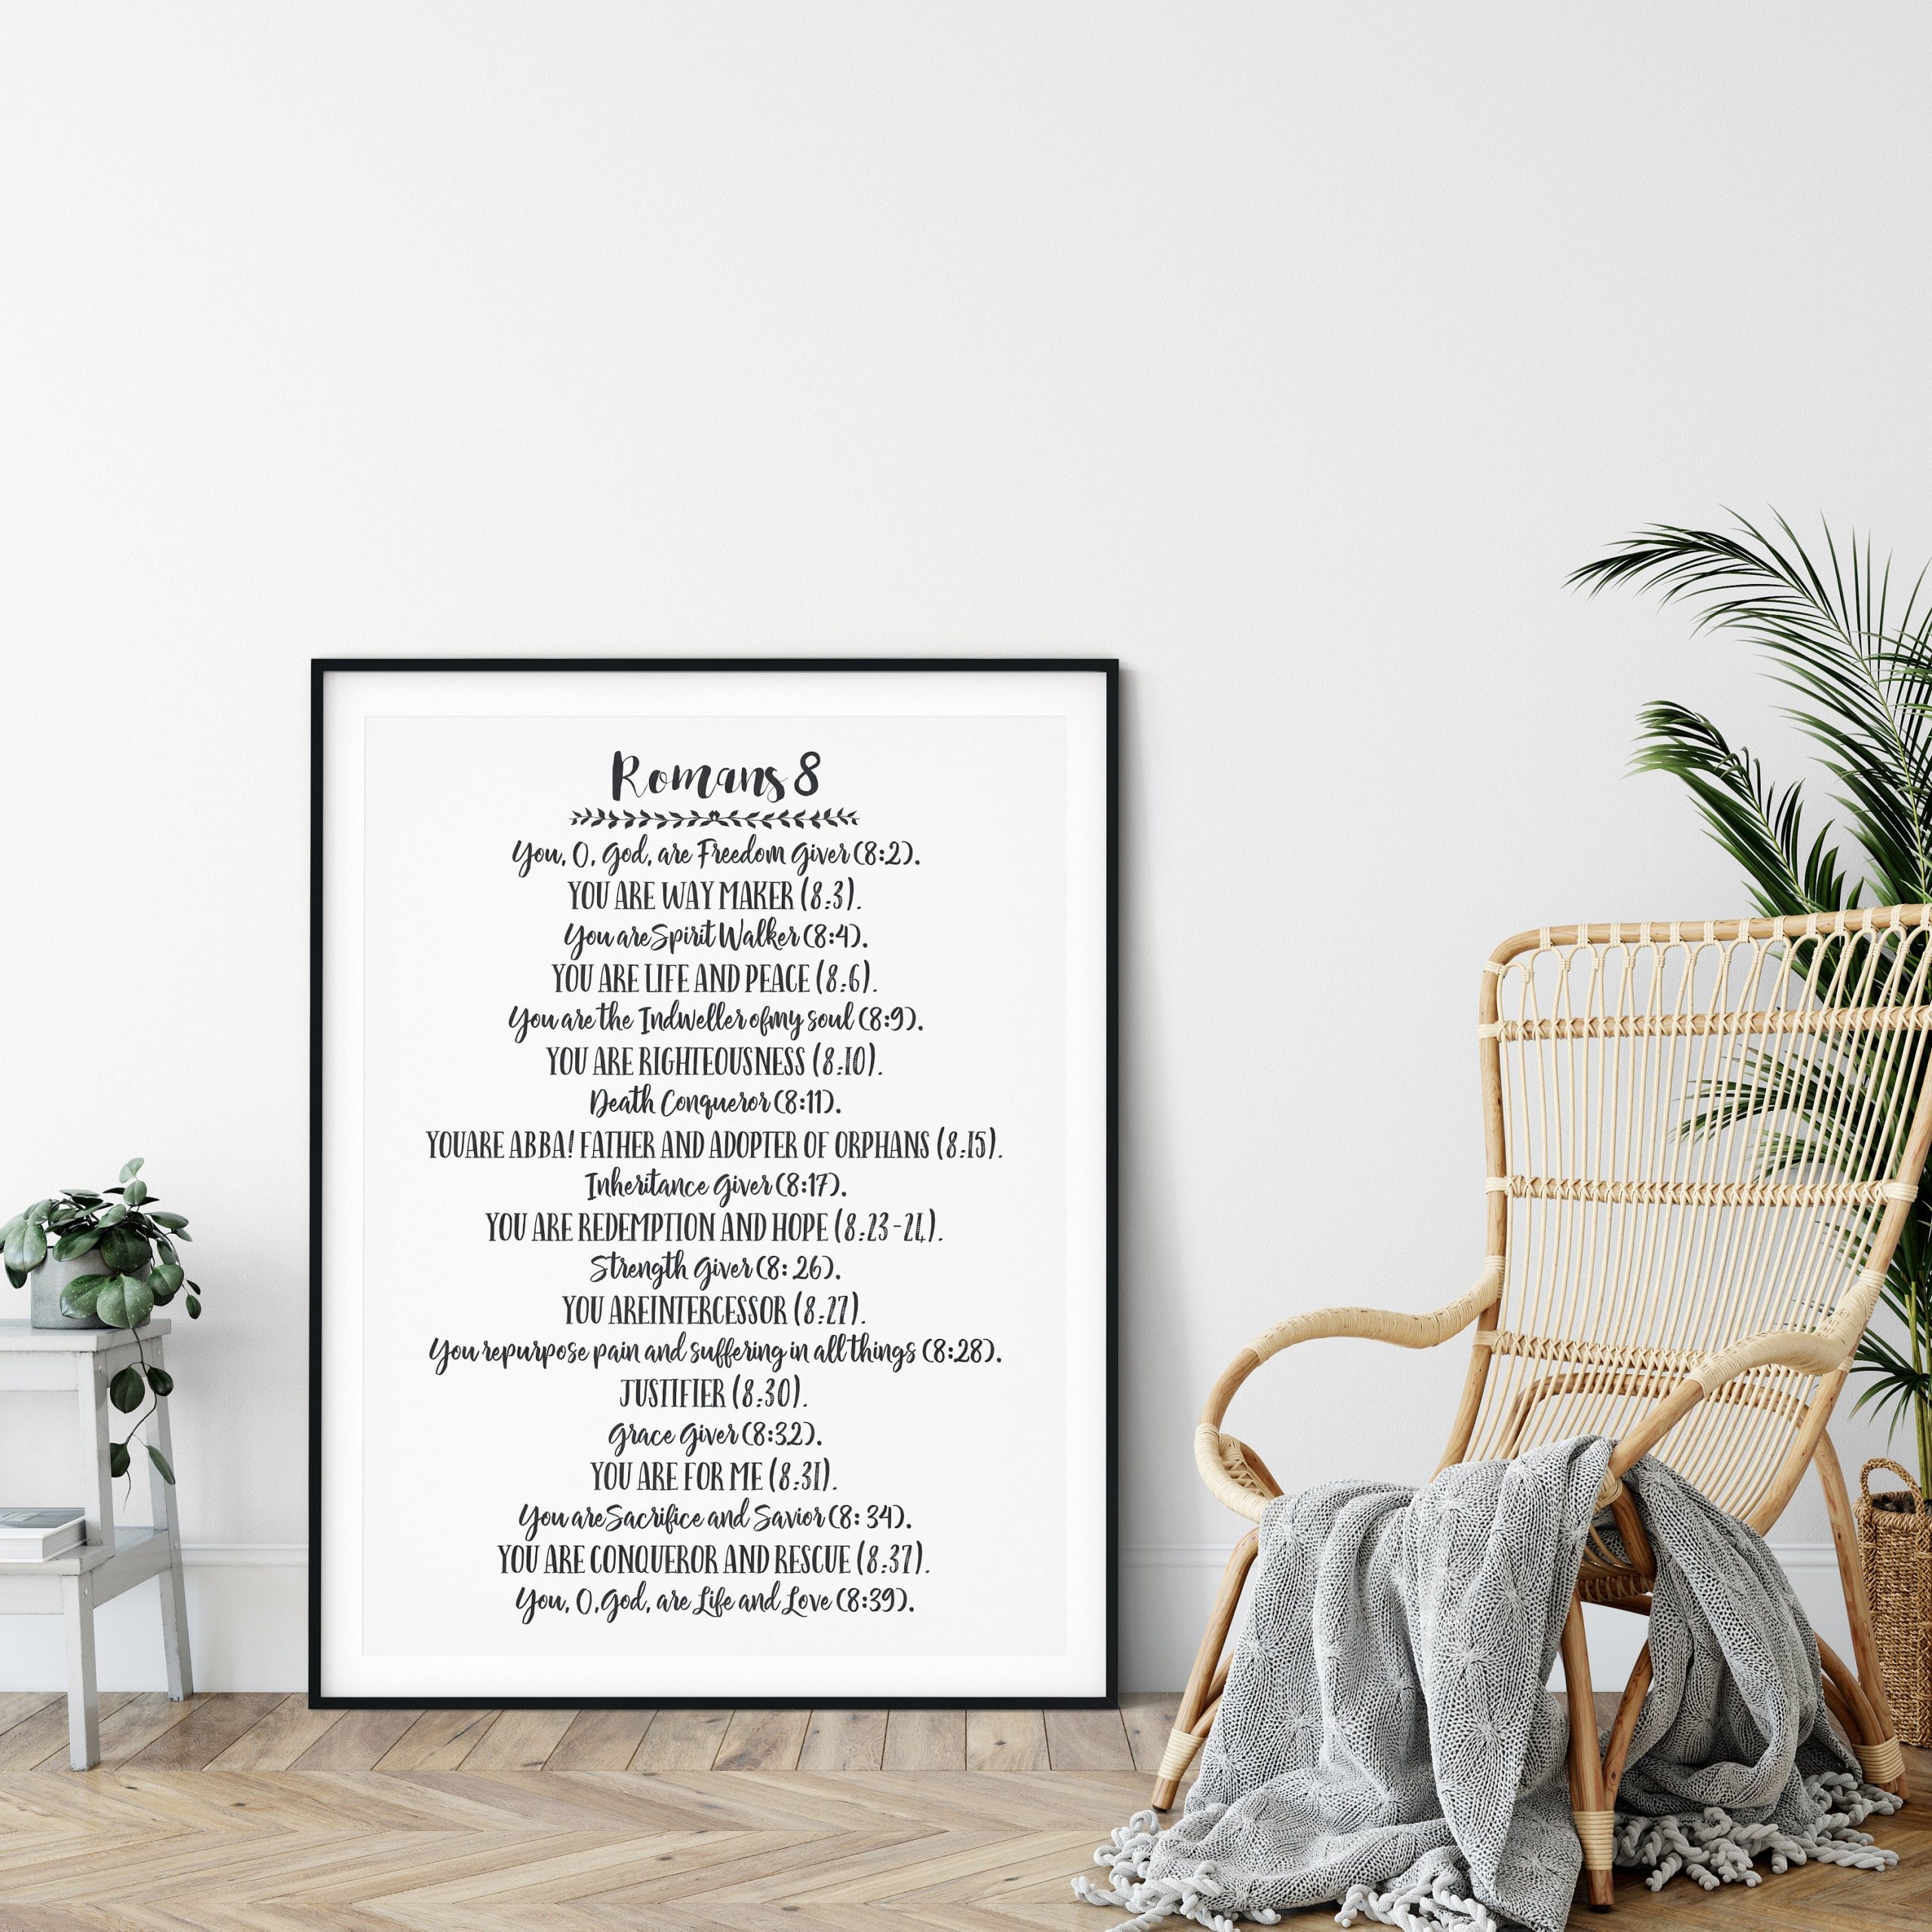 You God Are Freedom Giver, Romans 8, Printable Bible Verse Wall Art, Scripture Prints, Wall Art